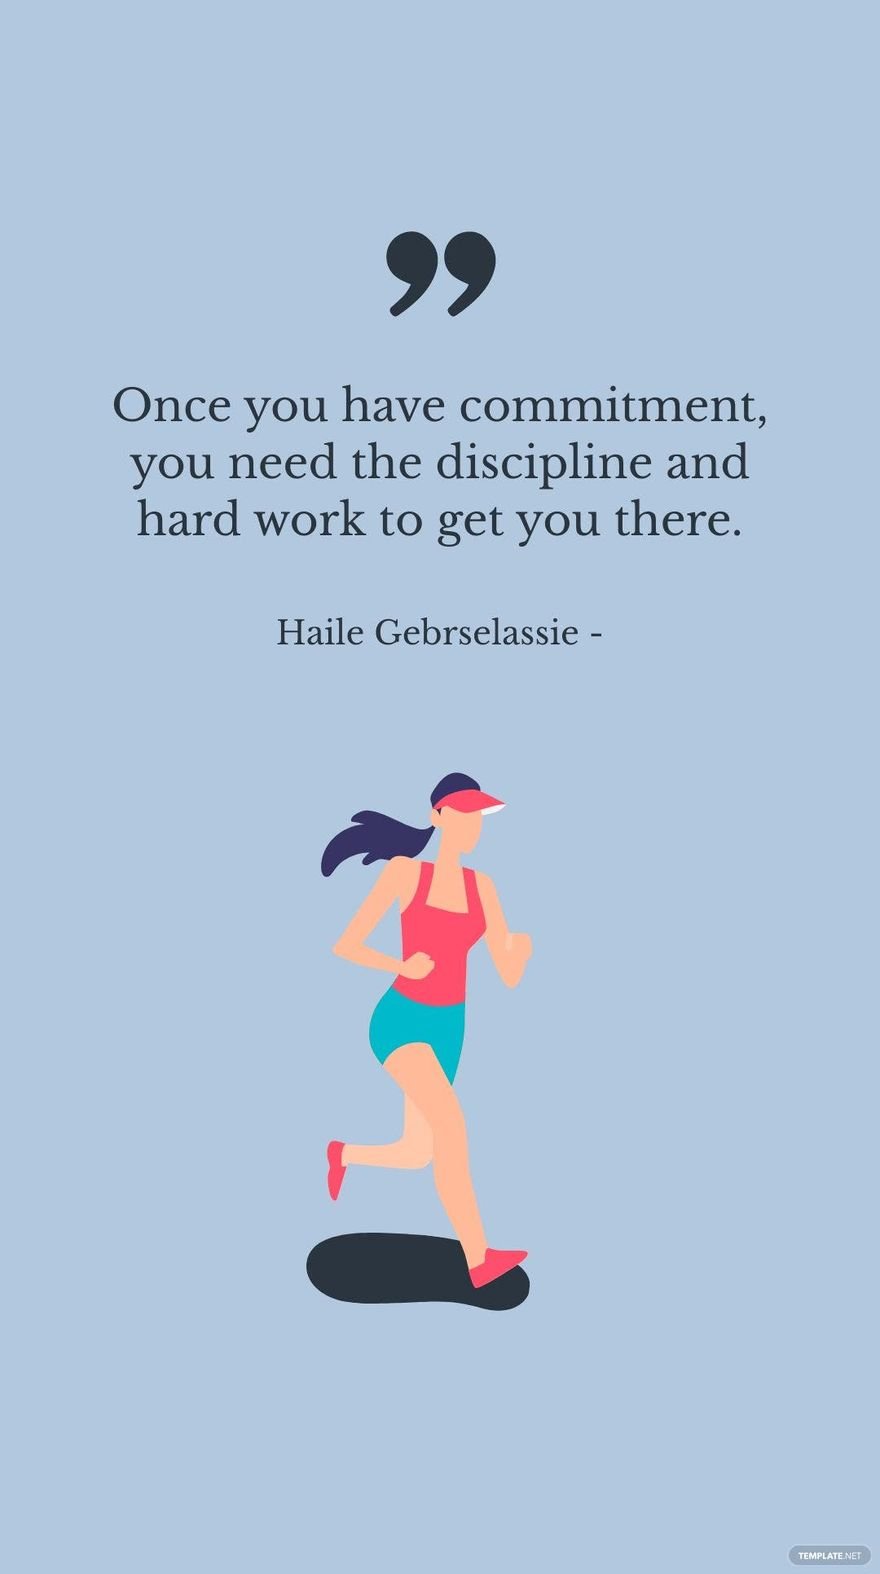 Haile Gebrselassie - Once you have commitment, you need the discipline and hard work to get you there. in JPG